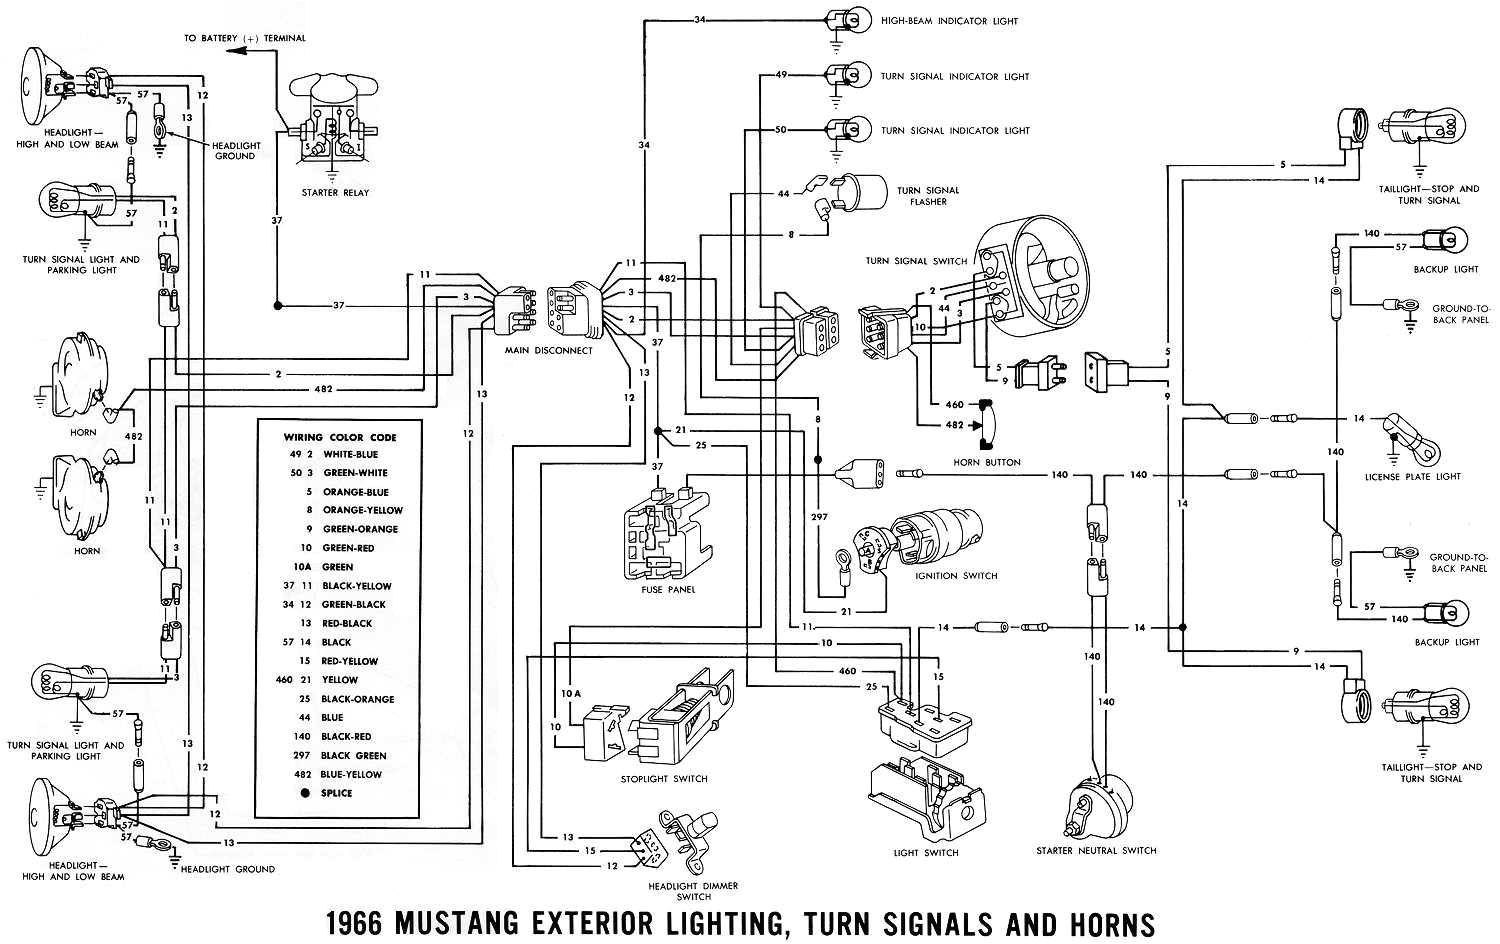 66 mustang turn signal diagram wiring schematic